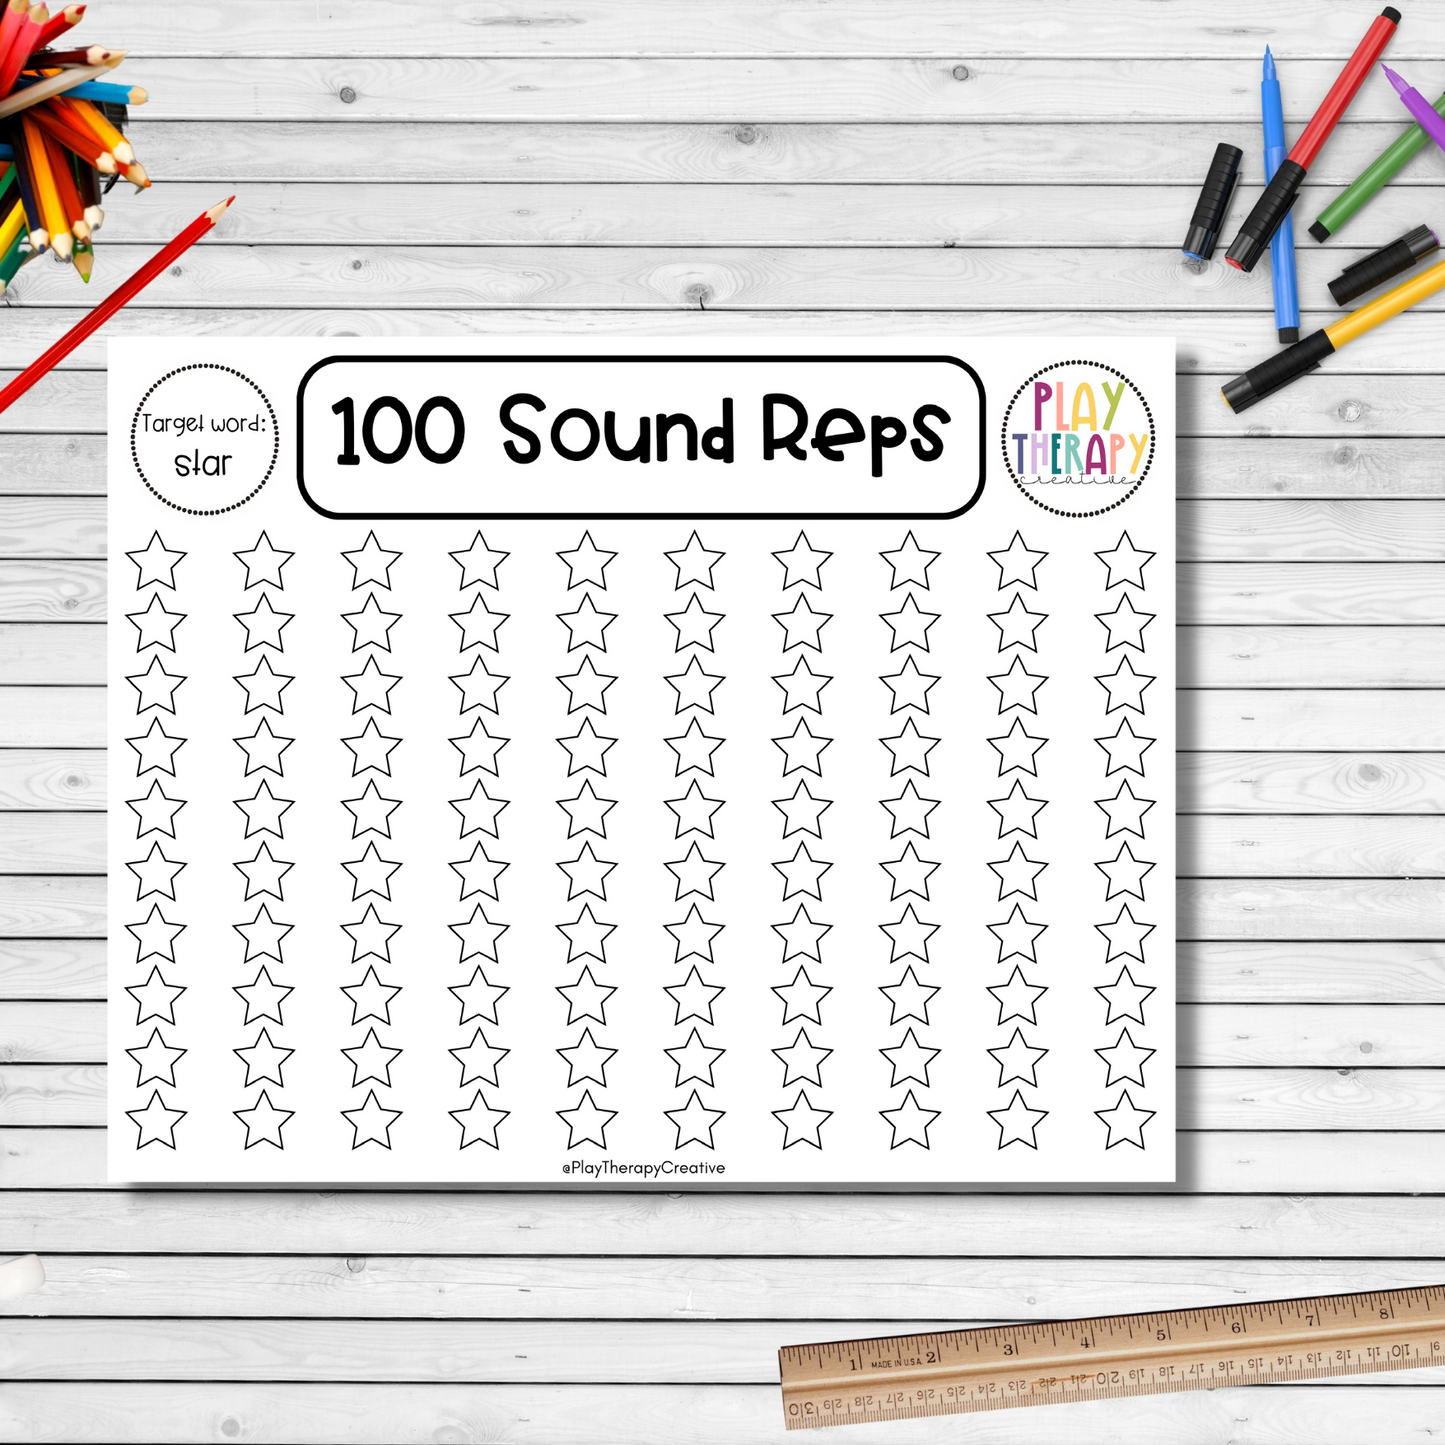 100 Sound Reps Activity for High Repetition Articulation Speech Therapy